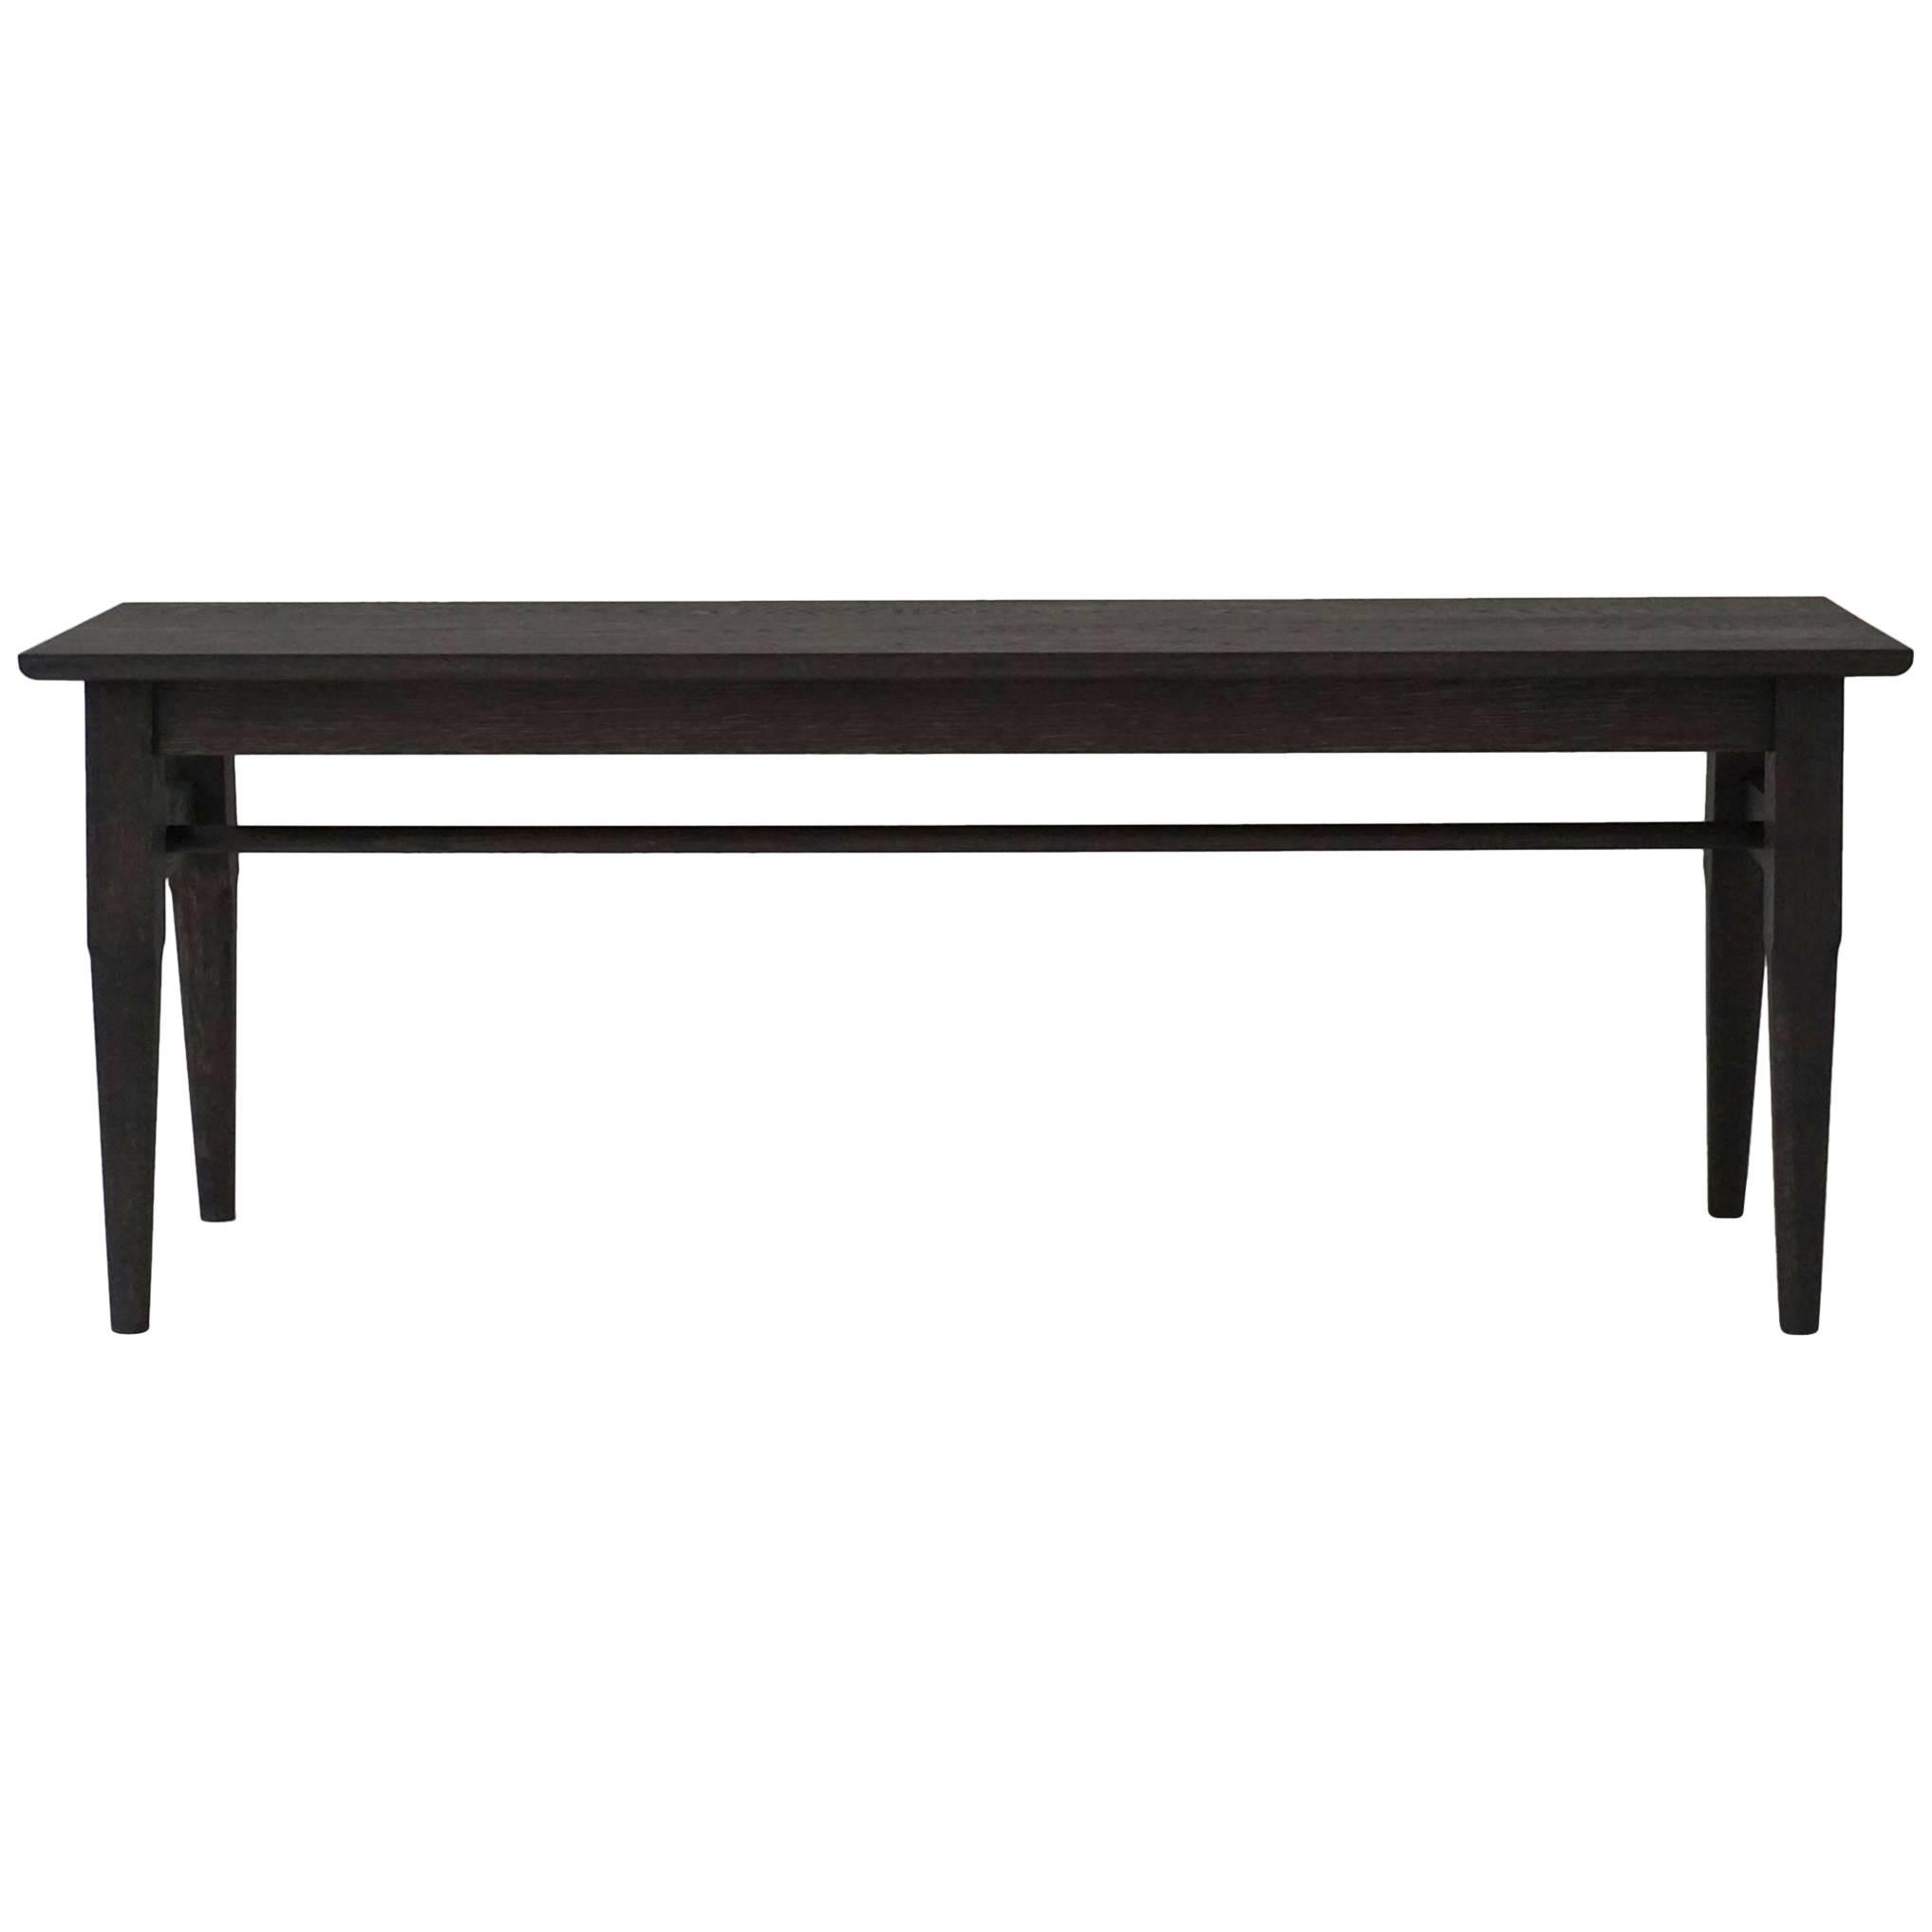 Reunion Bench Handcrafted Oxidized White Oak Bench Seating with Tapered Legs For Sale